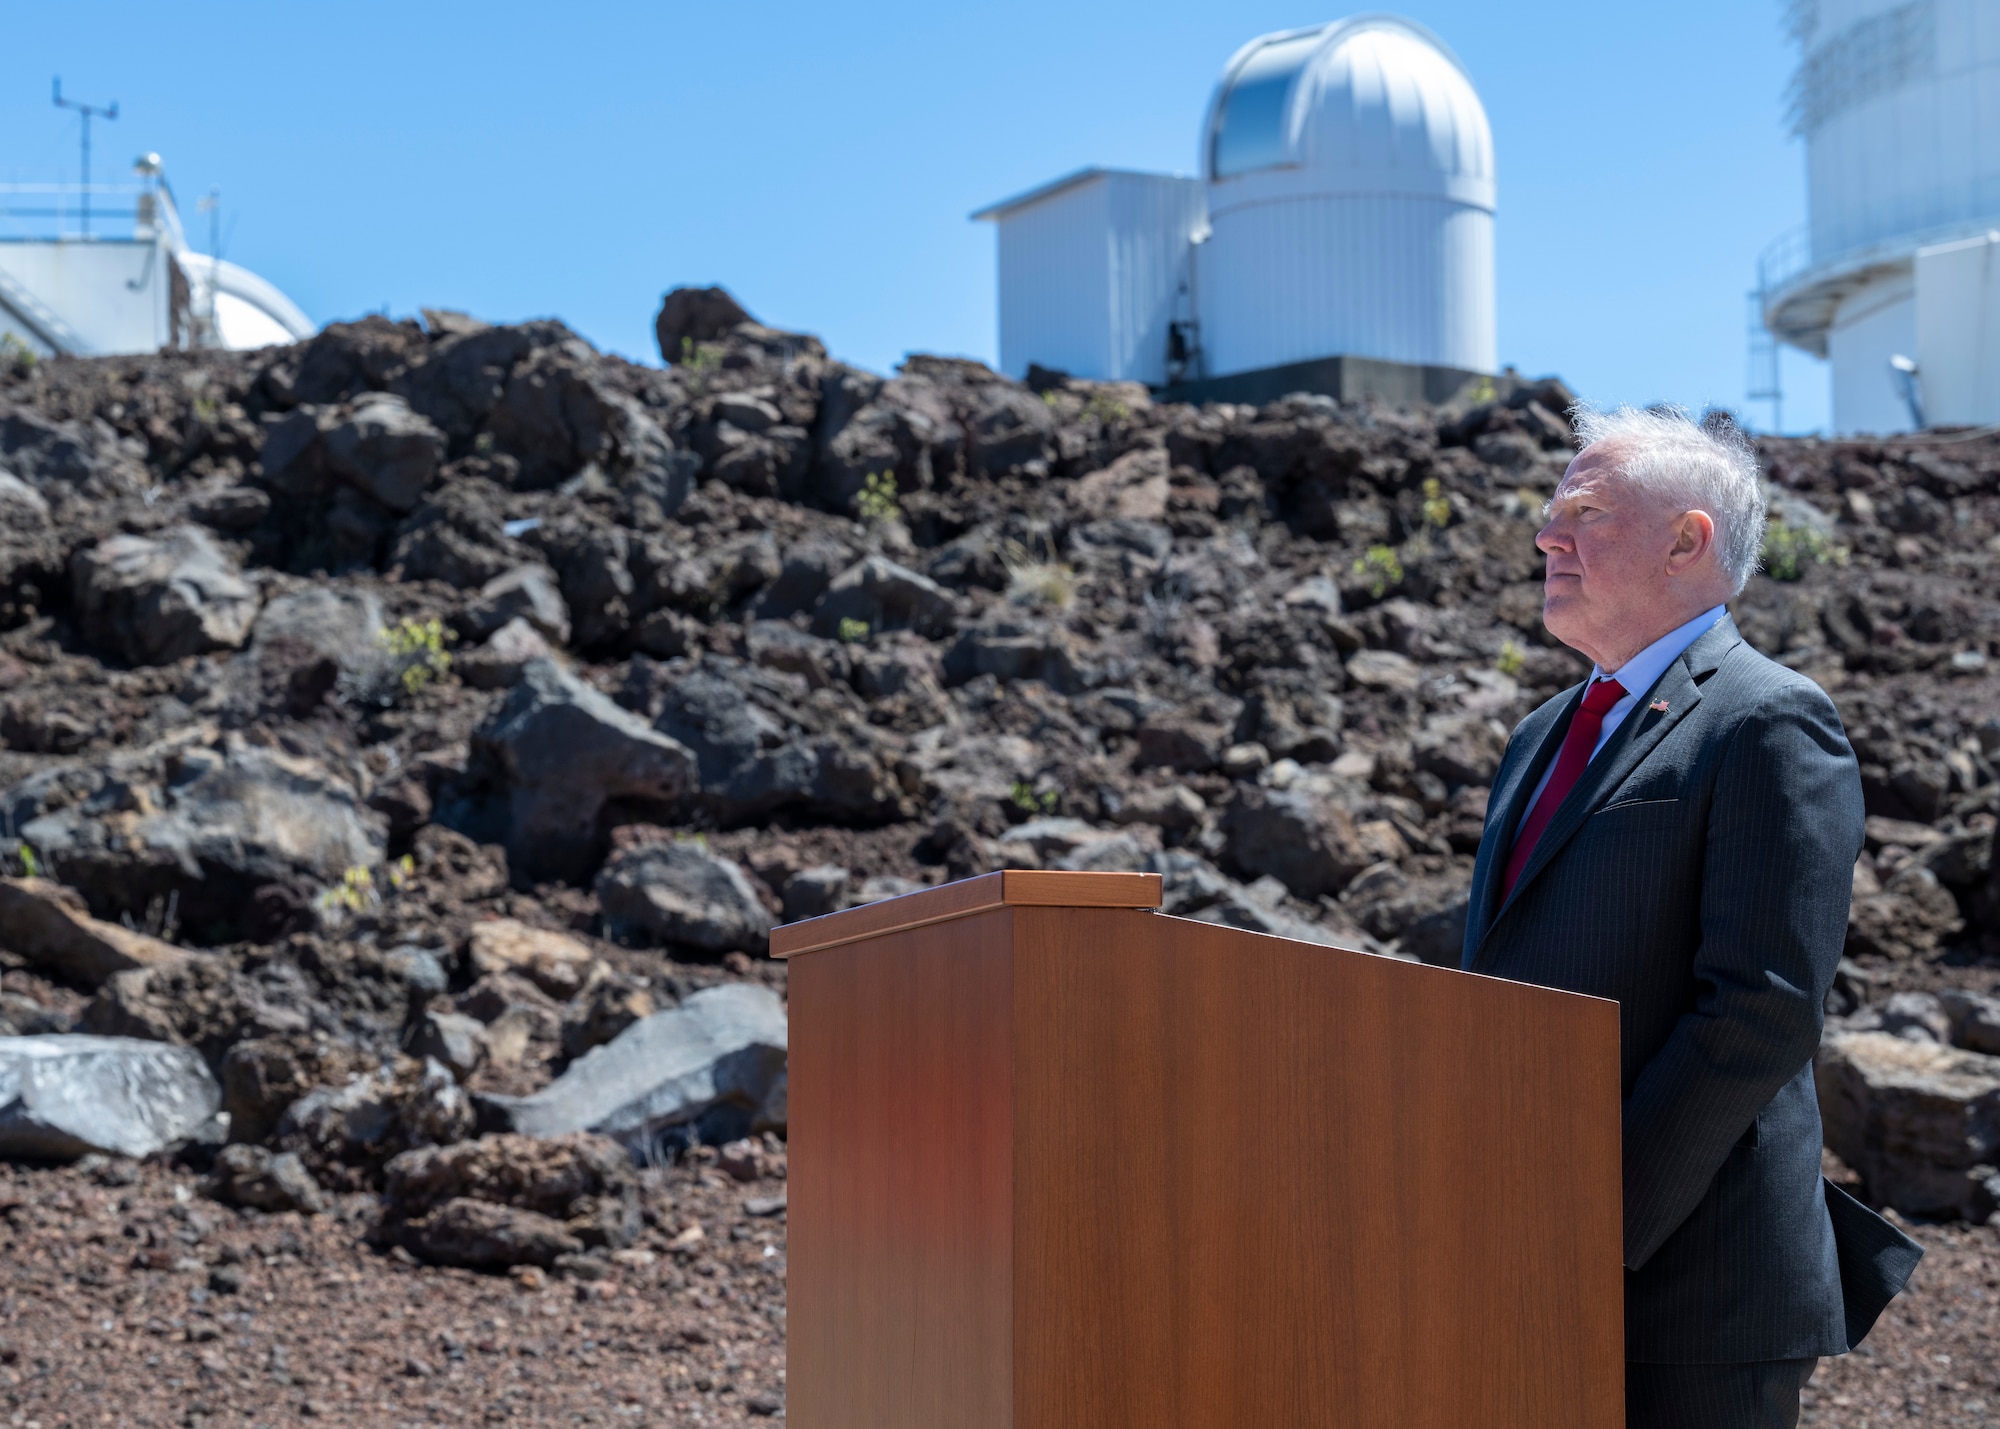 Secretary of the Air Force Frank Kendall addresses an audience during a visit to the Maui Space Surveillance Complex in Haleakalā, Hawaii, Feb. 22, 2023. Kendall’s visit reaffirmed the department’s commitment to comprehensively address the damage caused after approximately 700 gallons of fuel were released from an on-site backup generator Jan. 29, 2023, contaminating Haleakalā's environmentally sensitive and culturally important summit. (Courtesy photo)